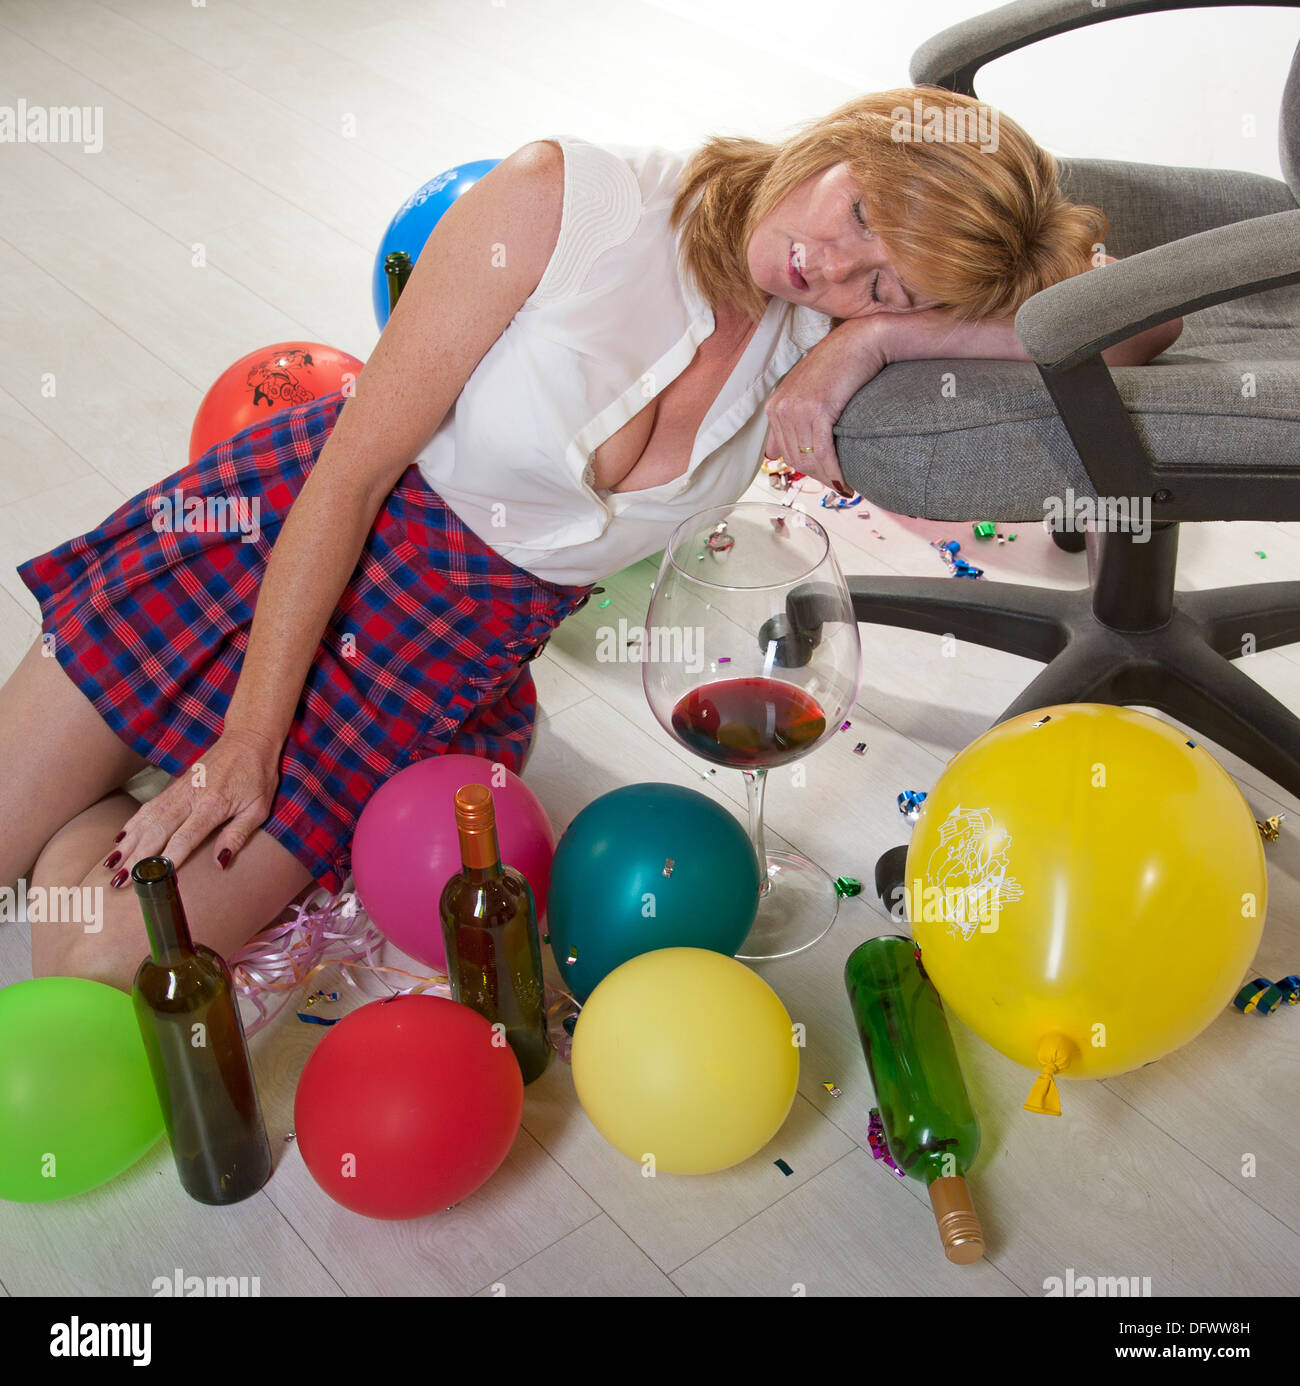 Female office party goer sleeping off the effects of alcohol using a swivel chair Stock Photo